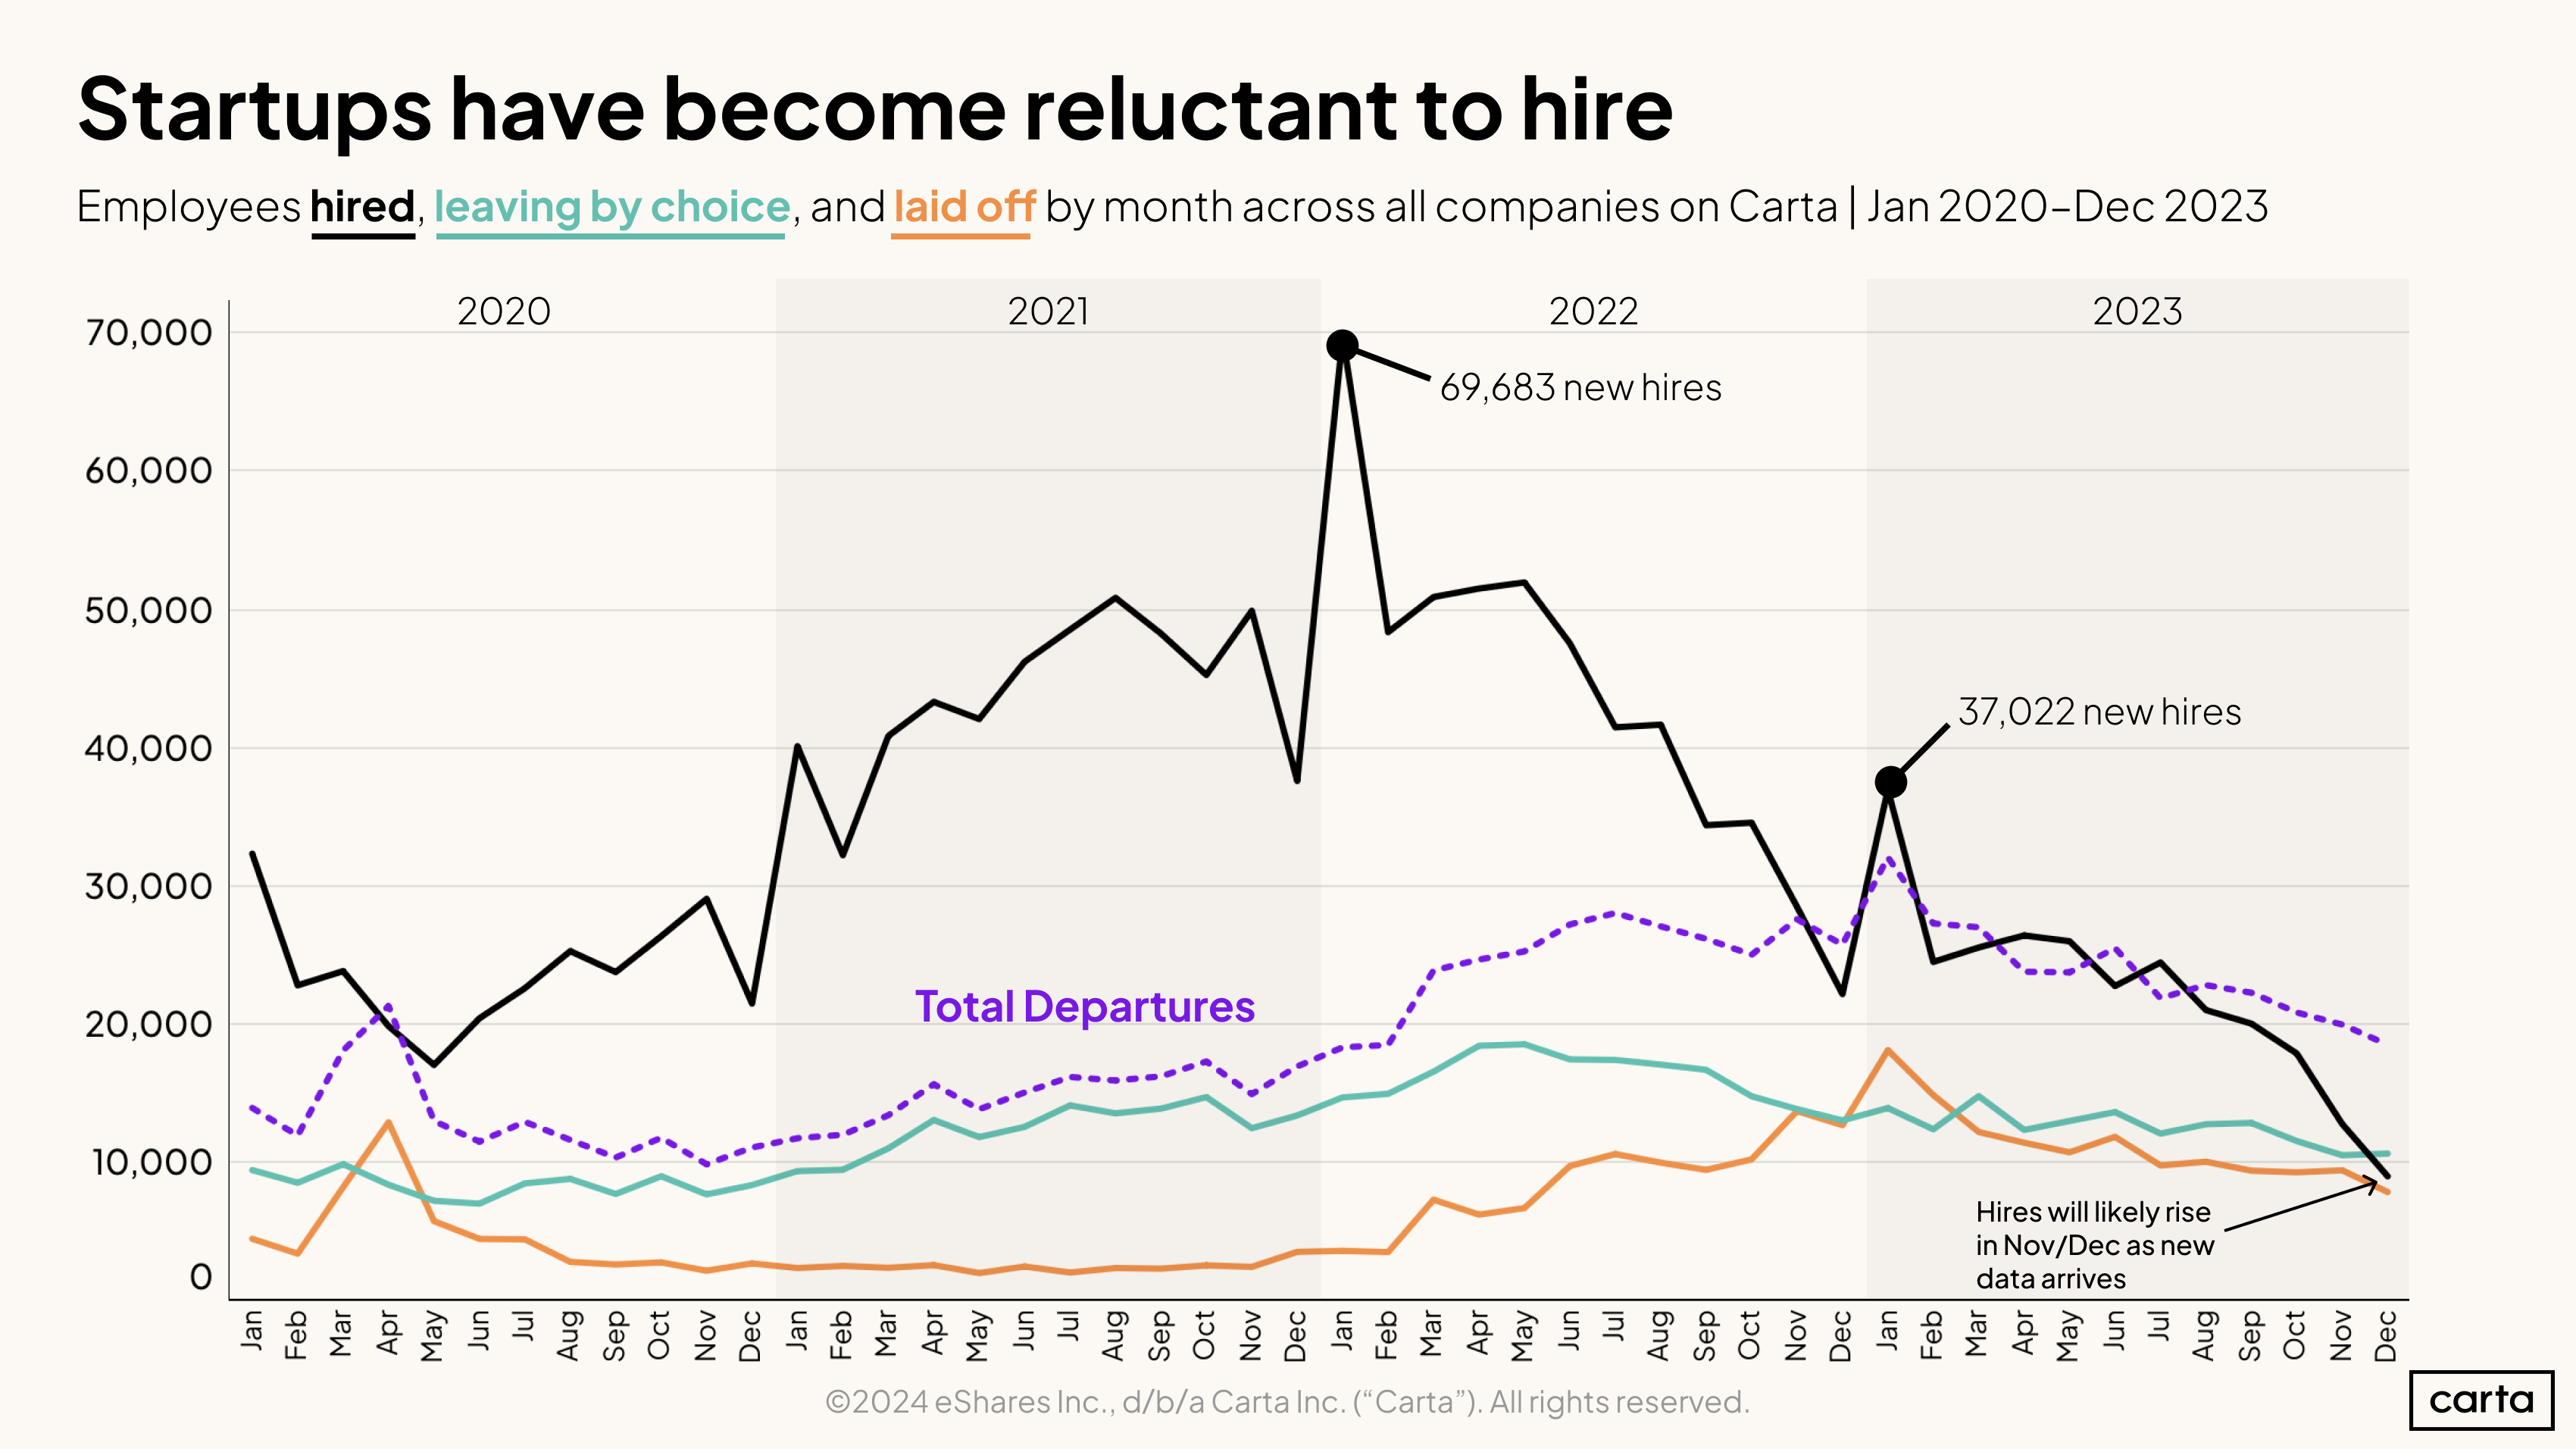 Startups have become reluctant to hire